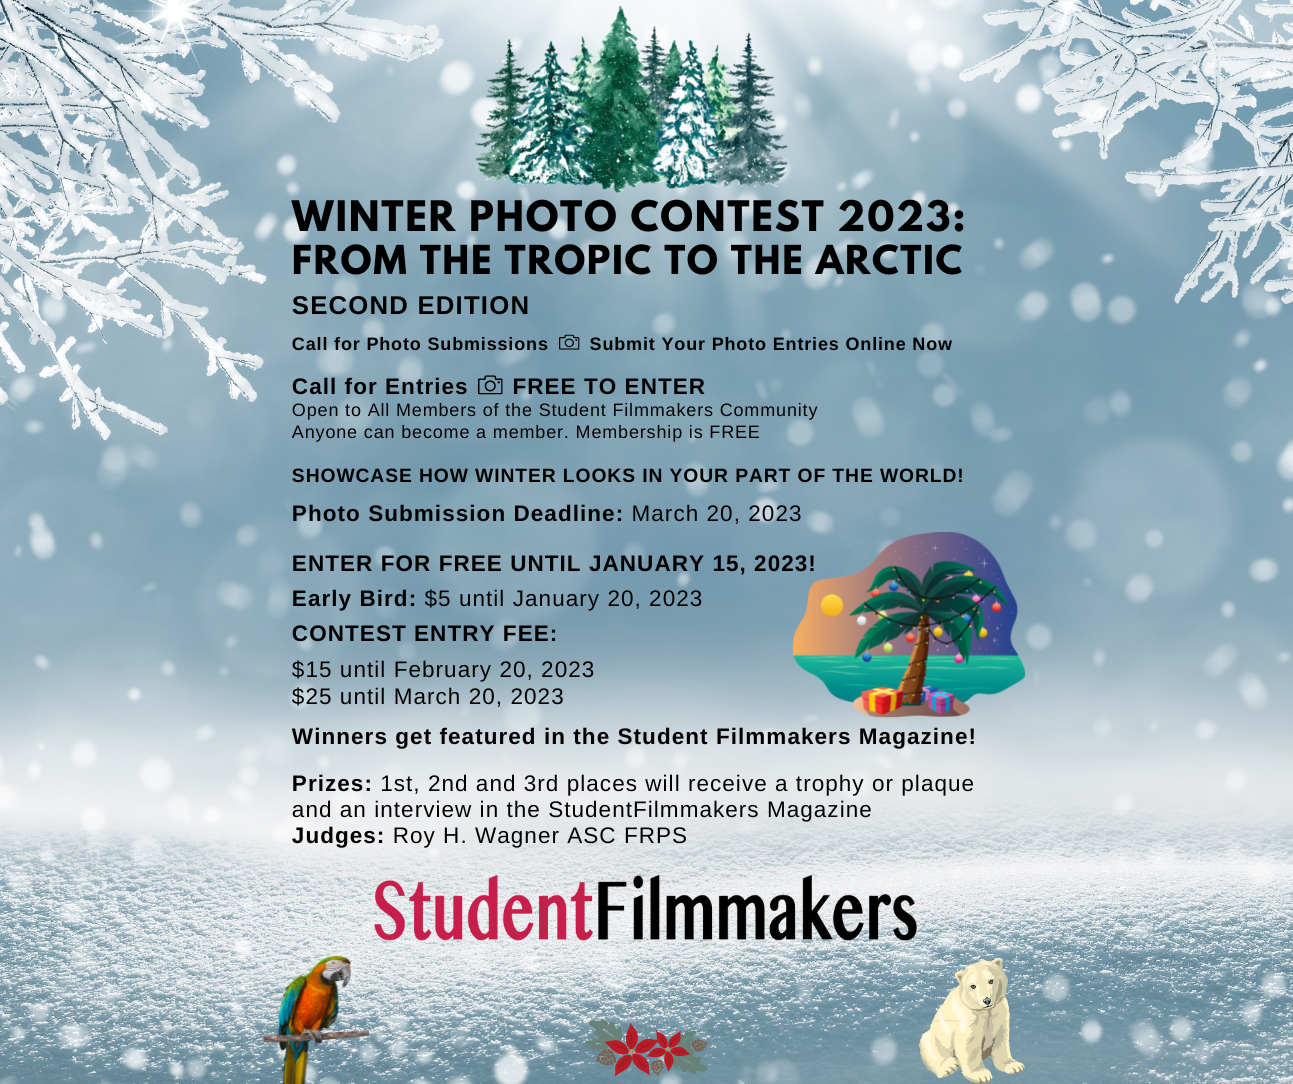 Winter Photo Contest 2023 Second Edition.png